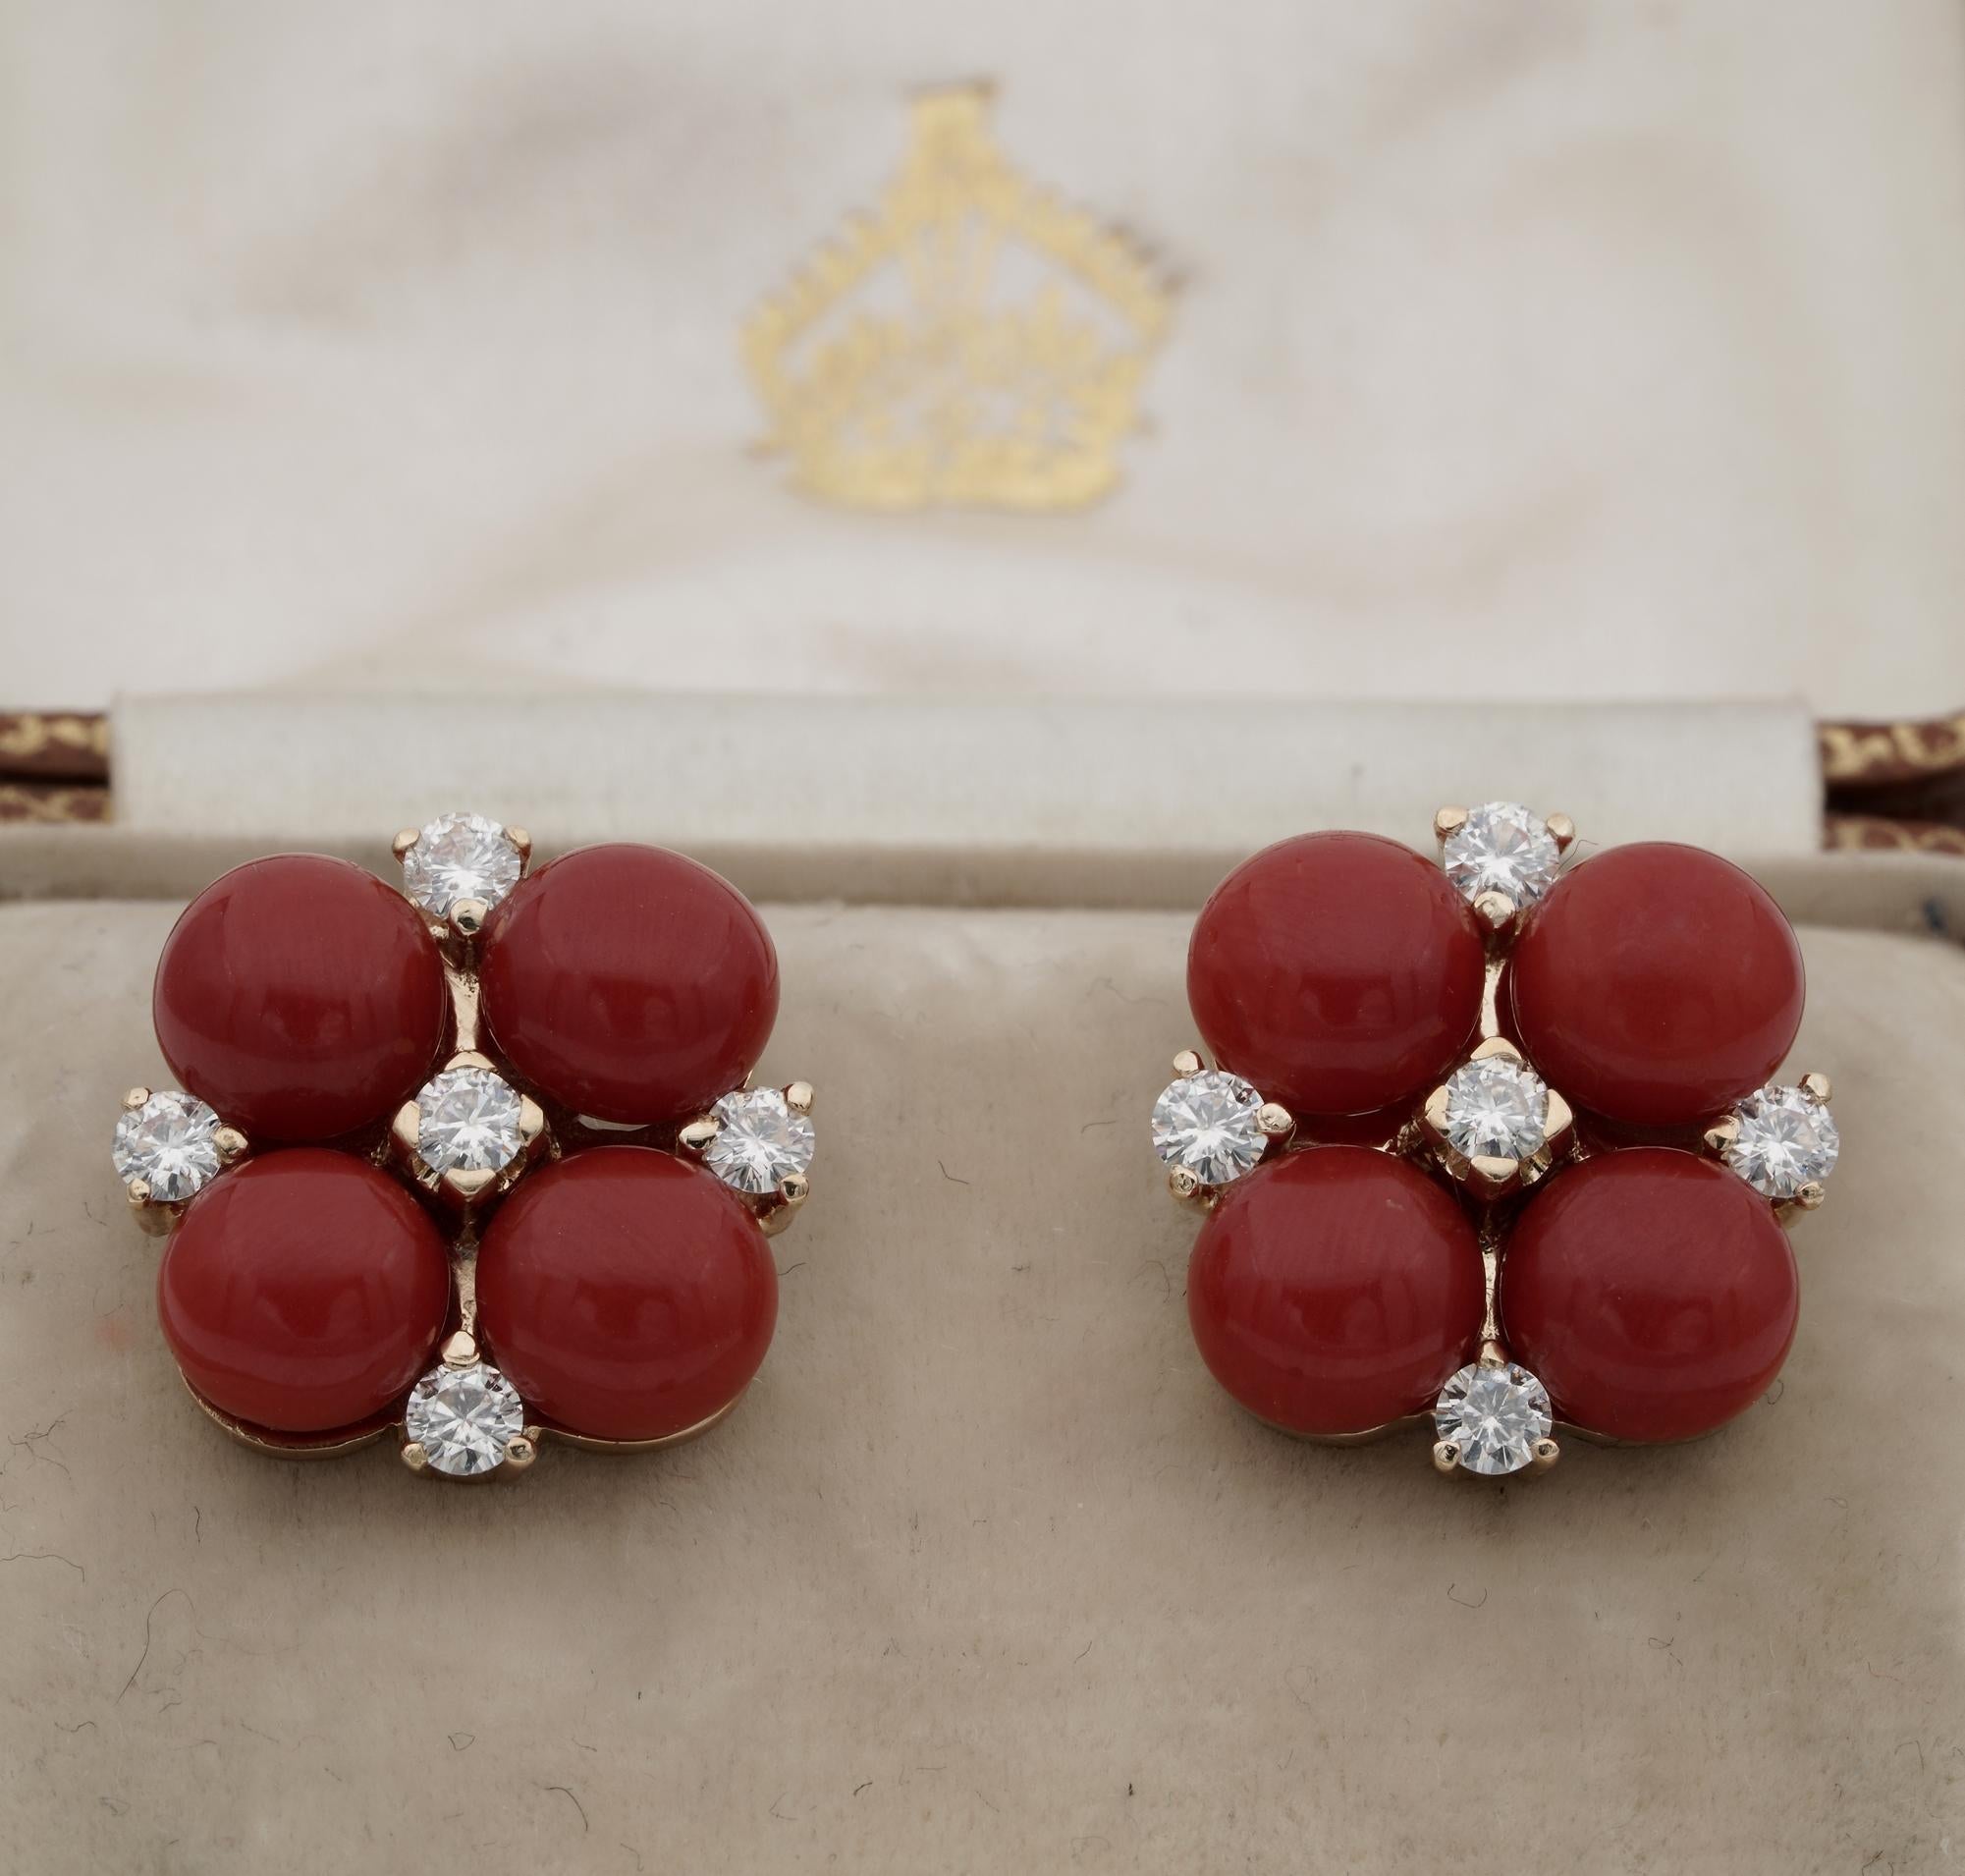 Coral Appeal
Charming pair of timeless style Coral and Diamond earrings
Hand crafted of solid 18 KT gold in a lovely floret design of appealing taste and elegance
Set with a selection of intense Red Natural untreated Sardinia Coral comprising four